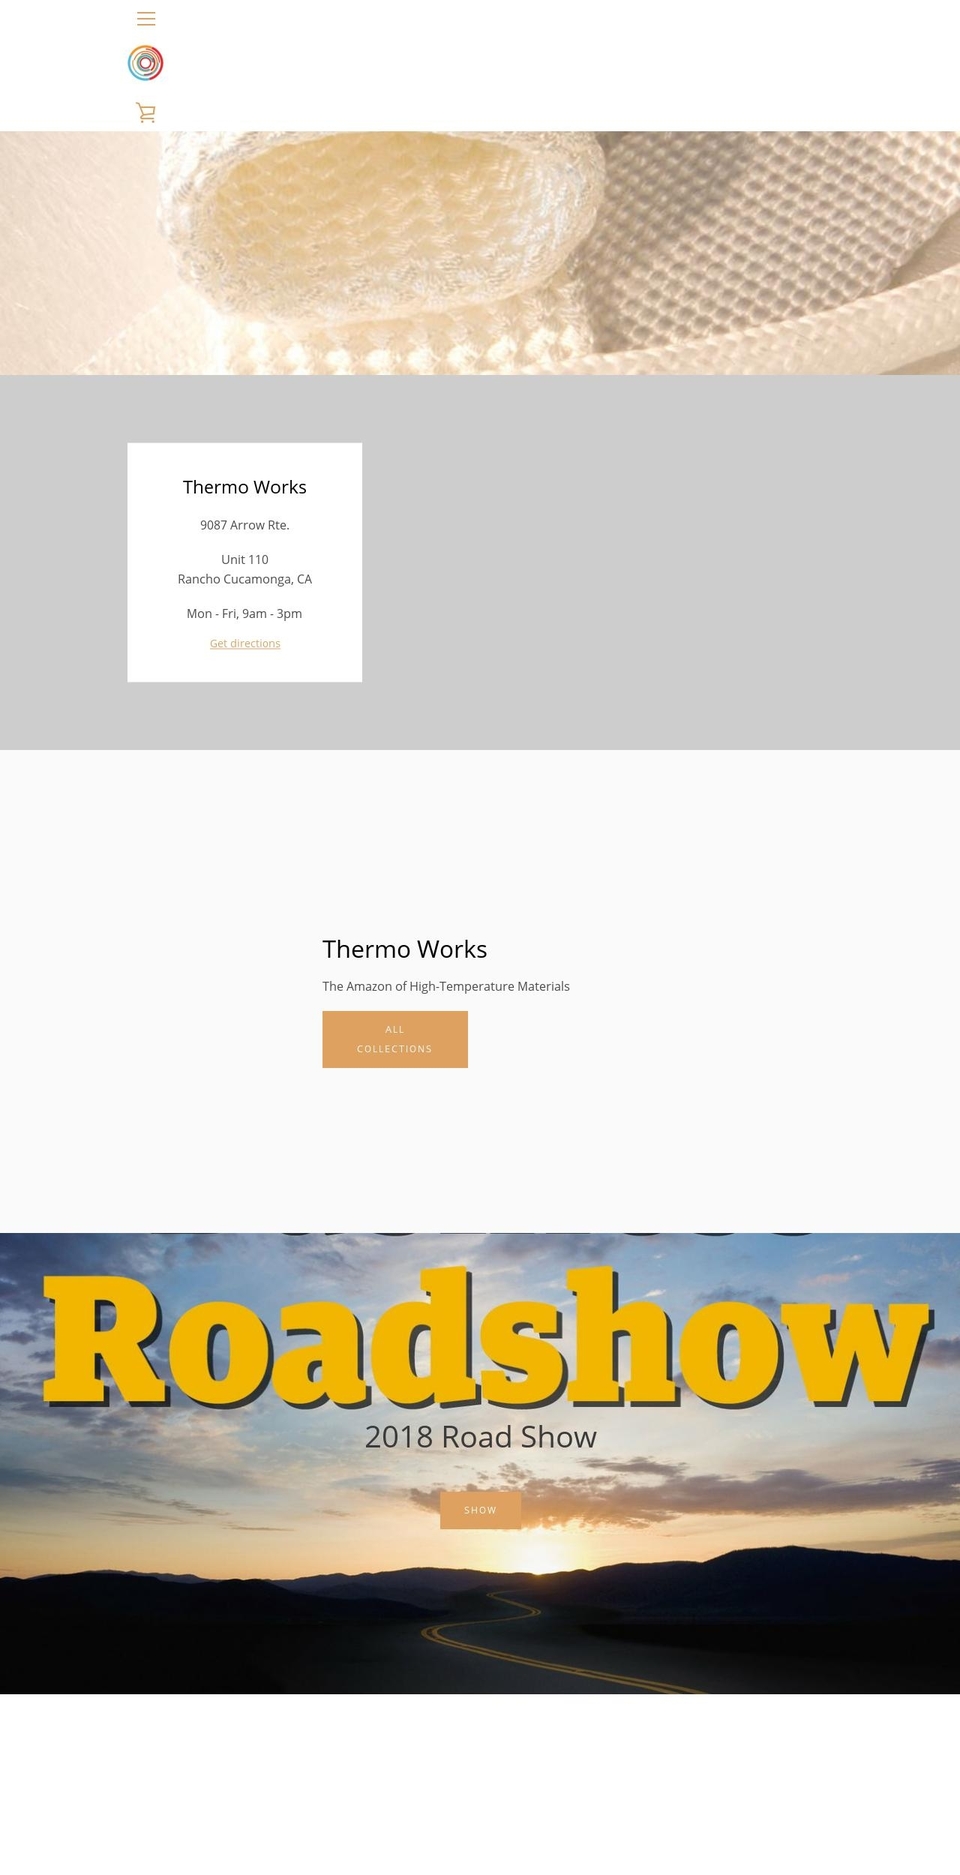 thermo.works shopify website screenshot